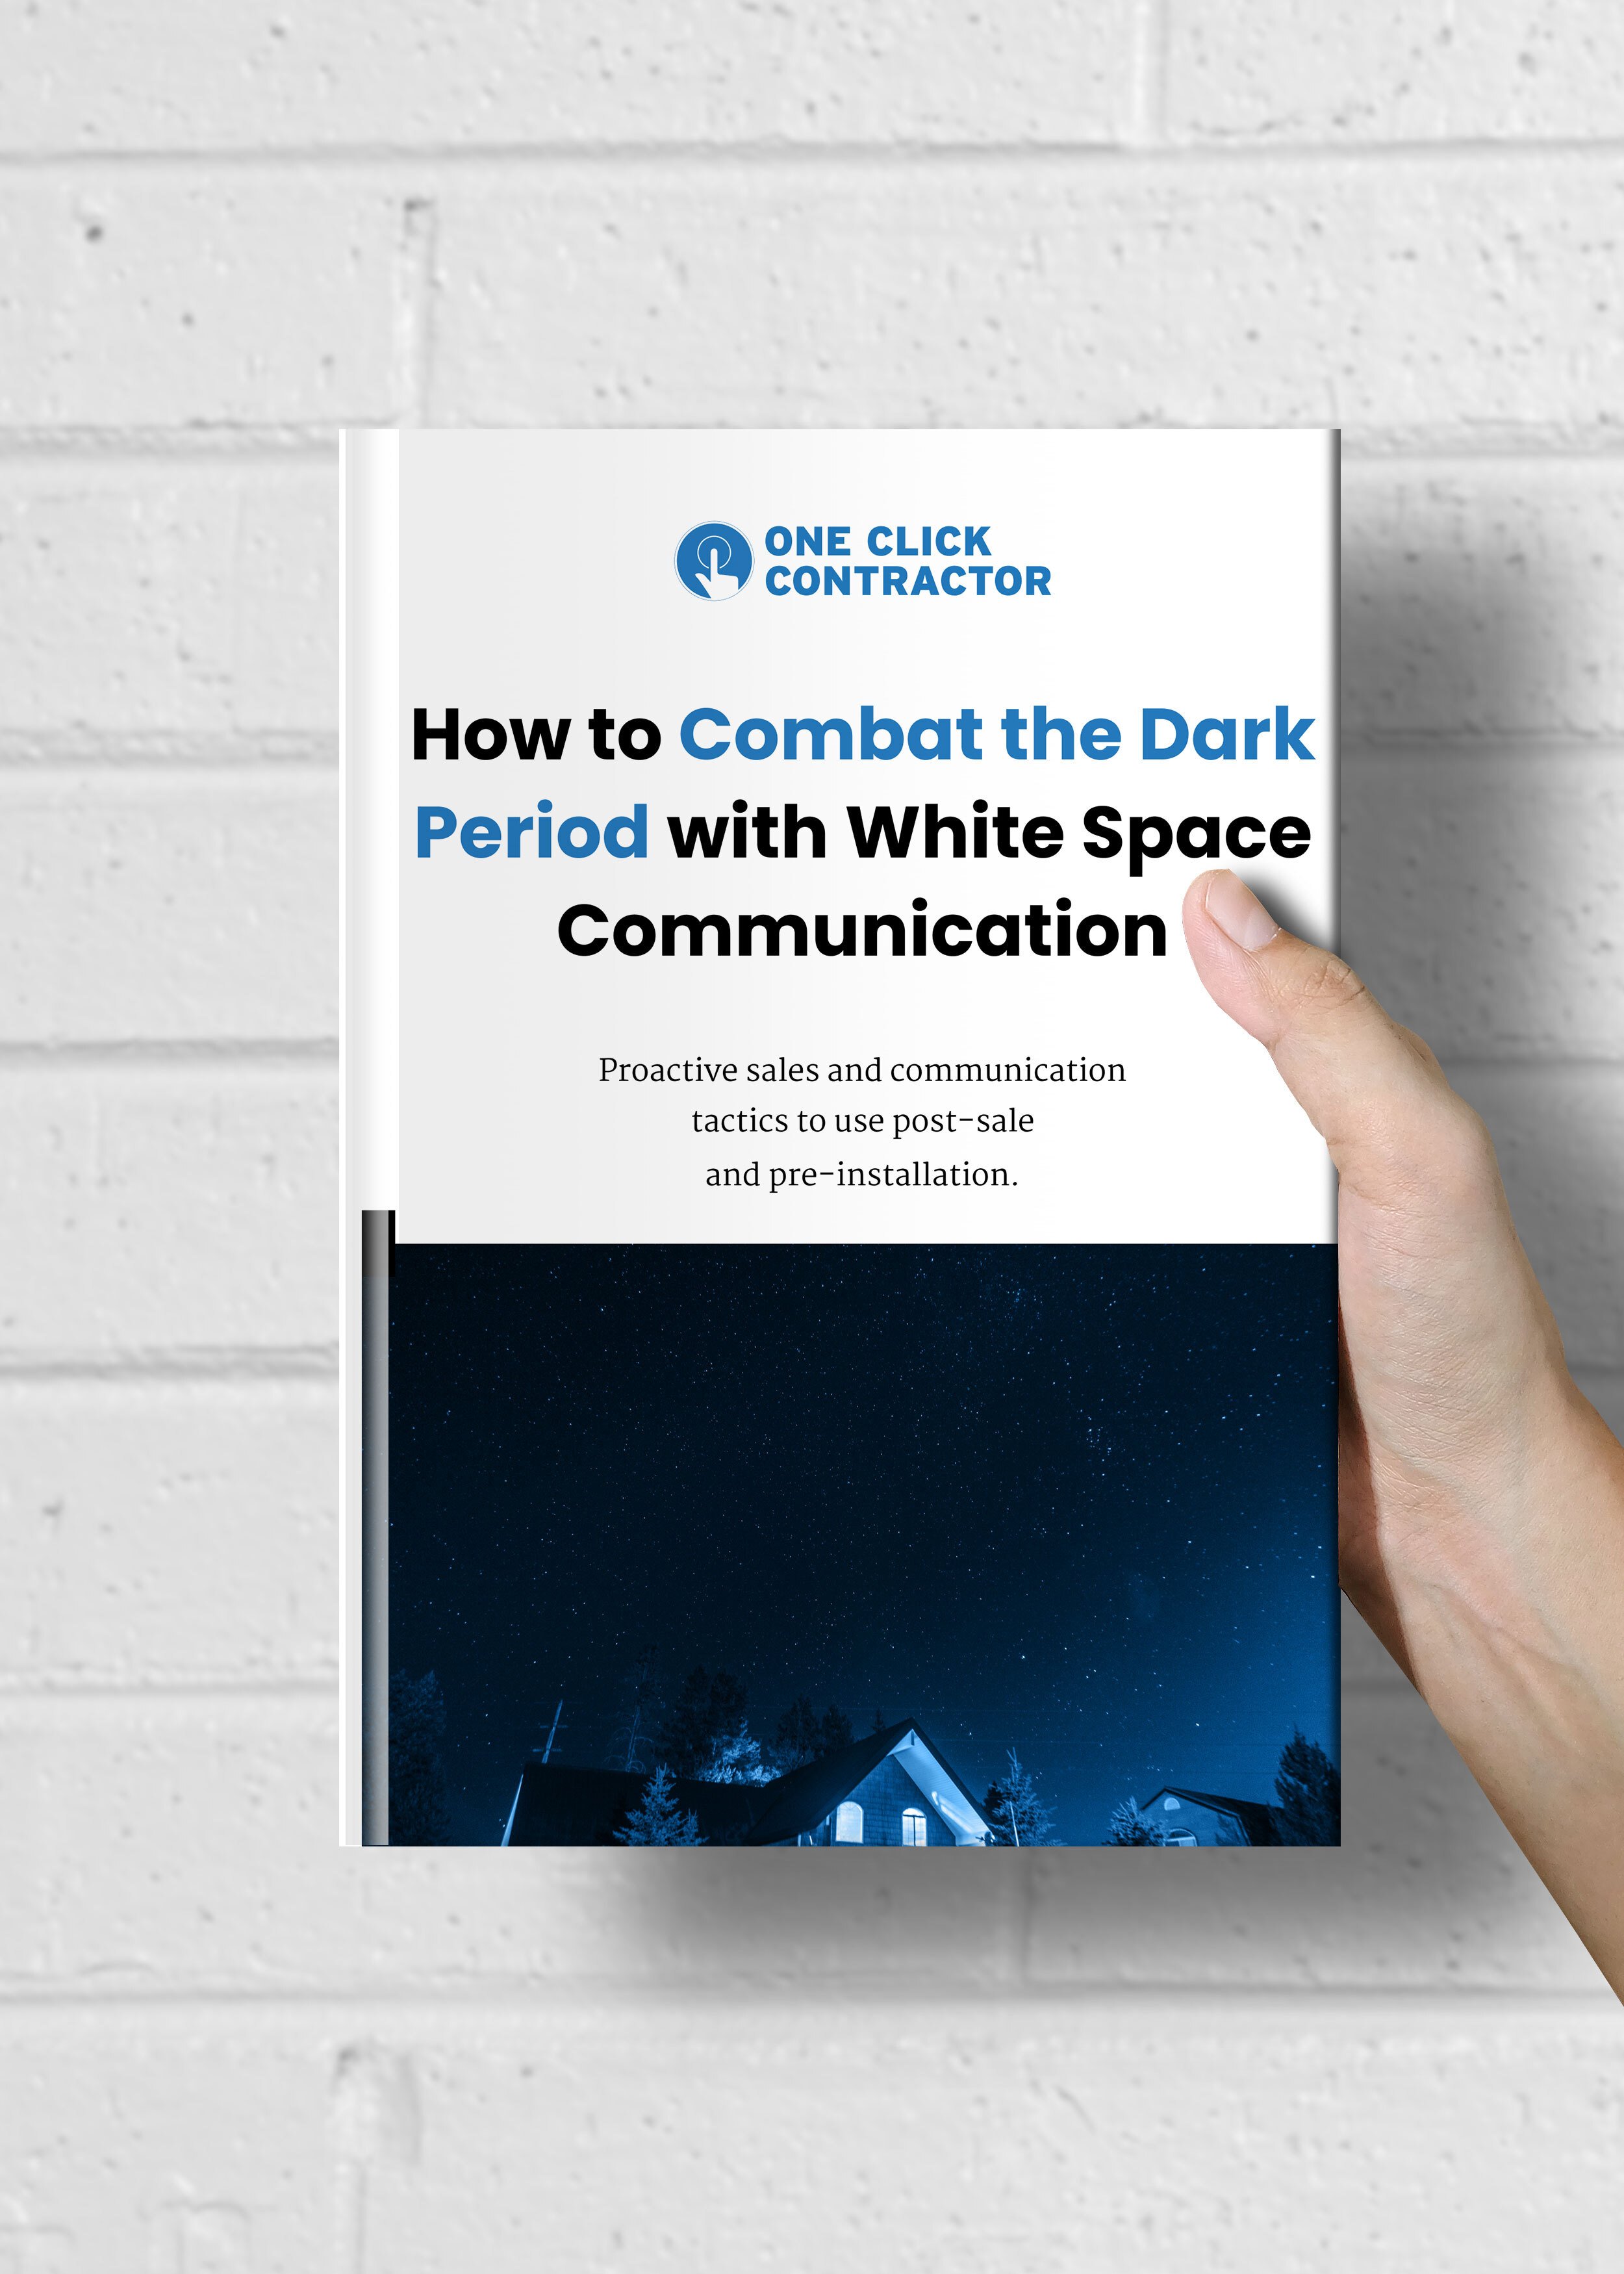 How to Combat the Dark Period with White Space Communication